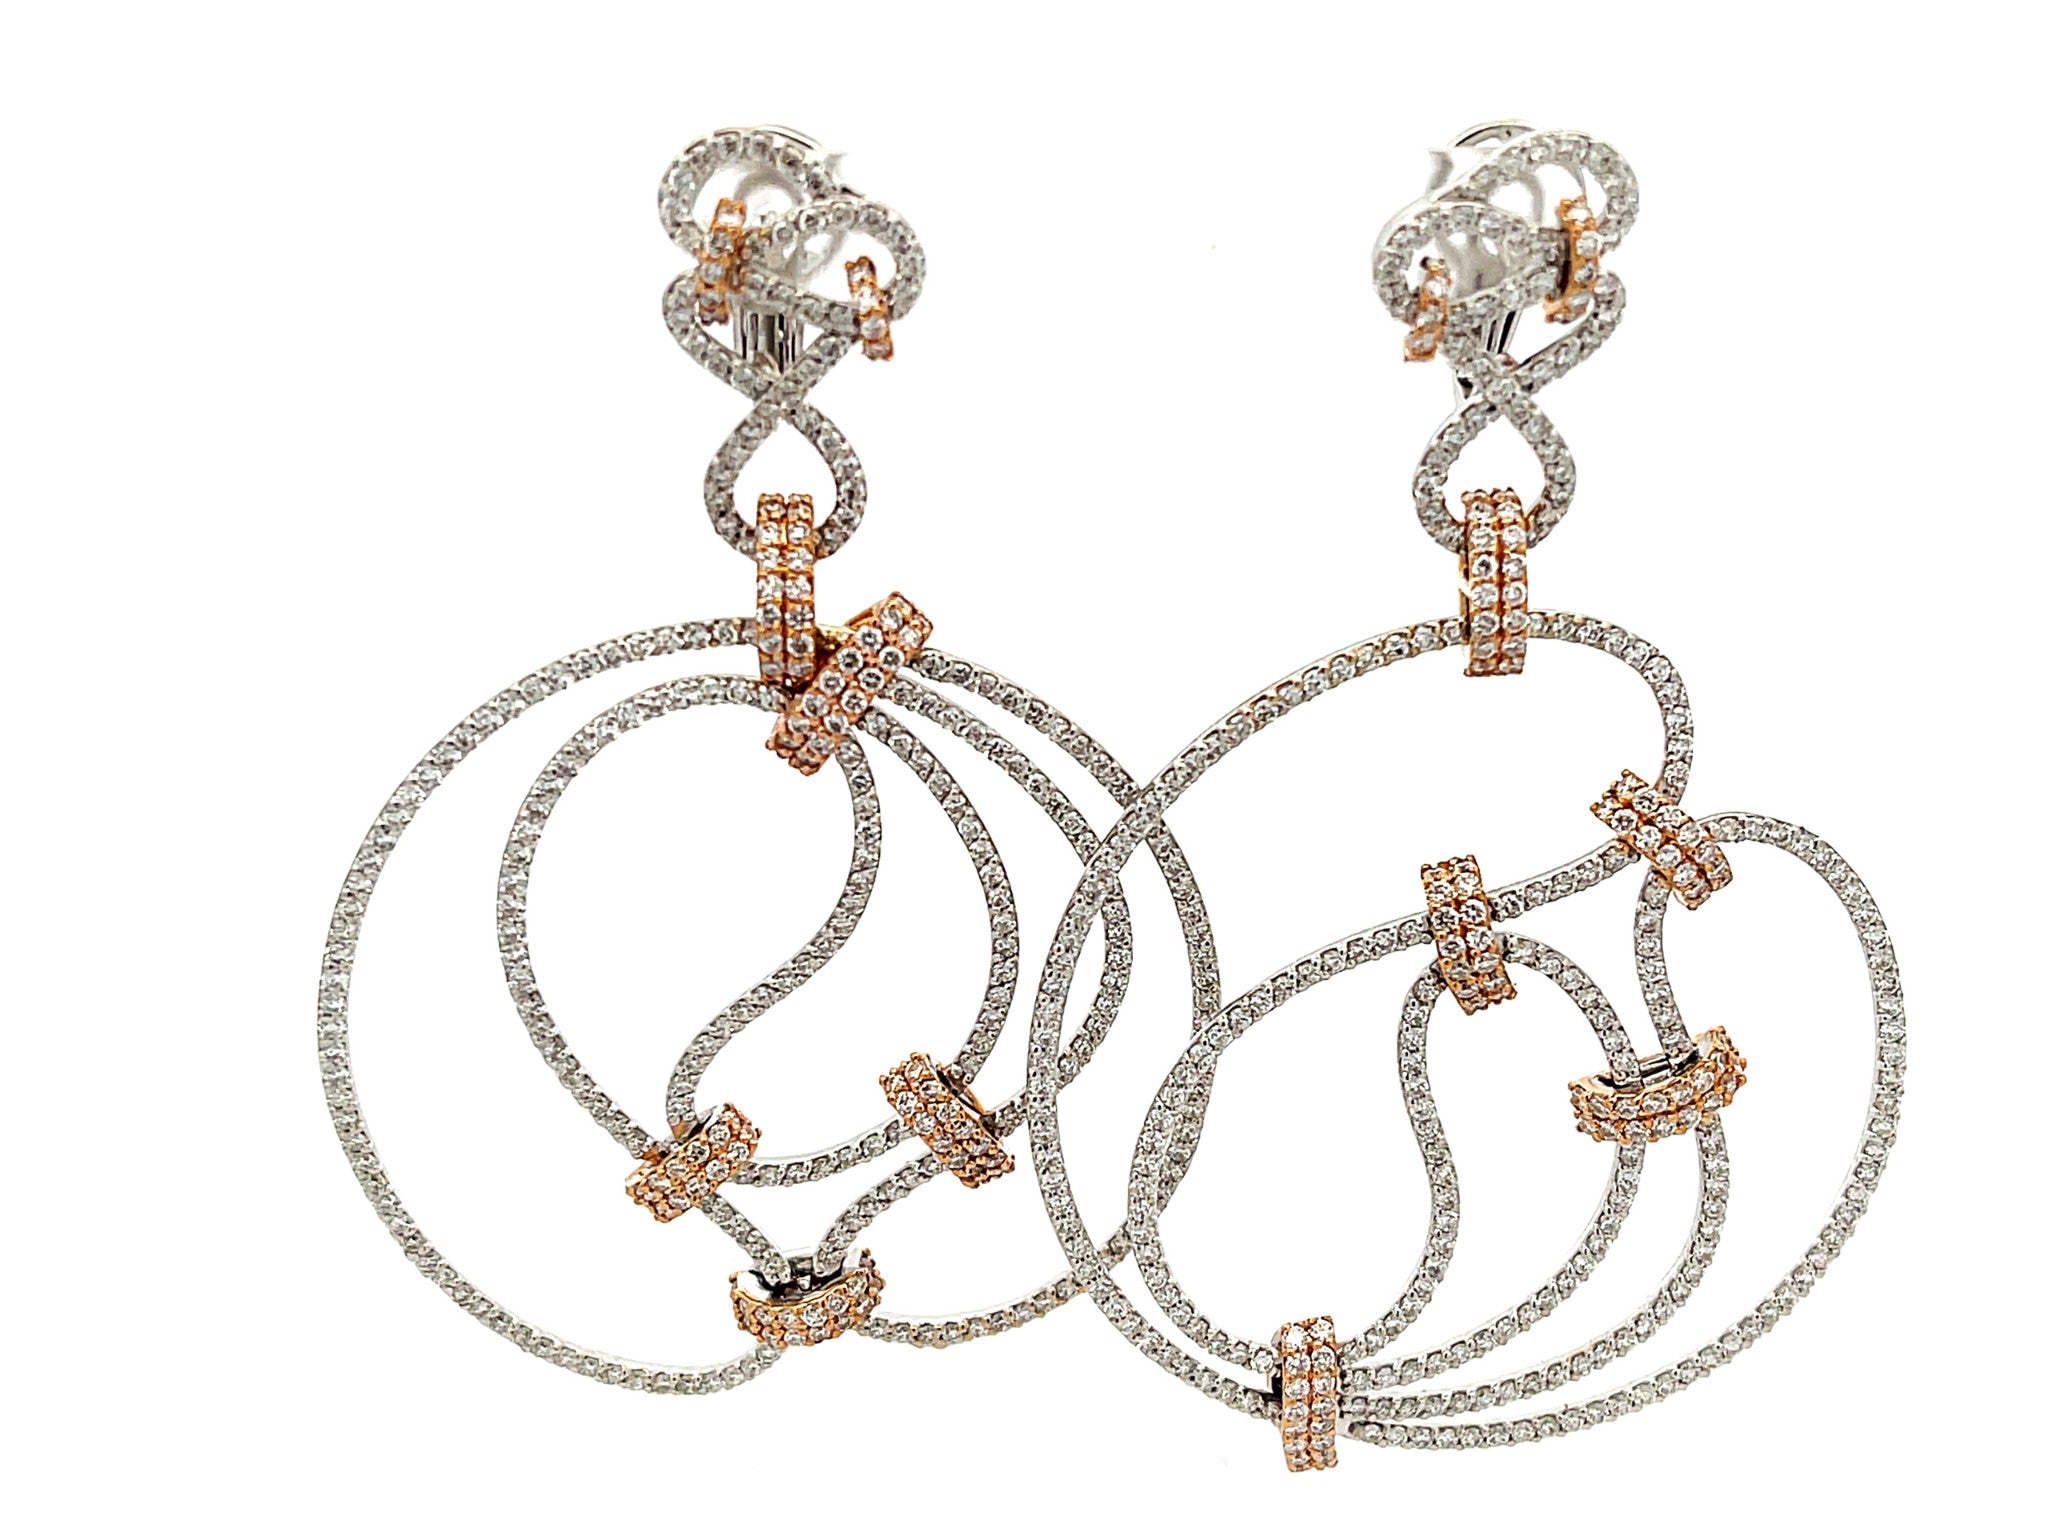 6.74 Carat Large Diamond Earrings in 18k White Gold With Rose Gold Accents